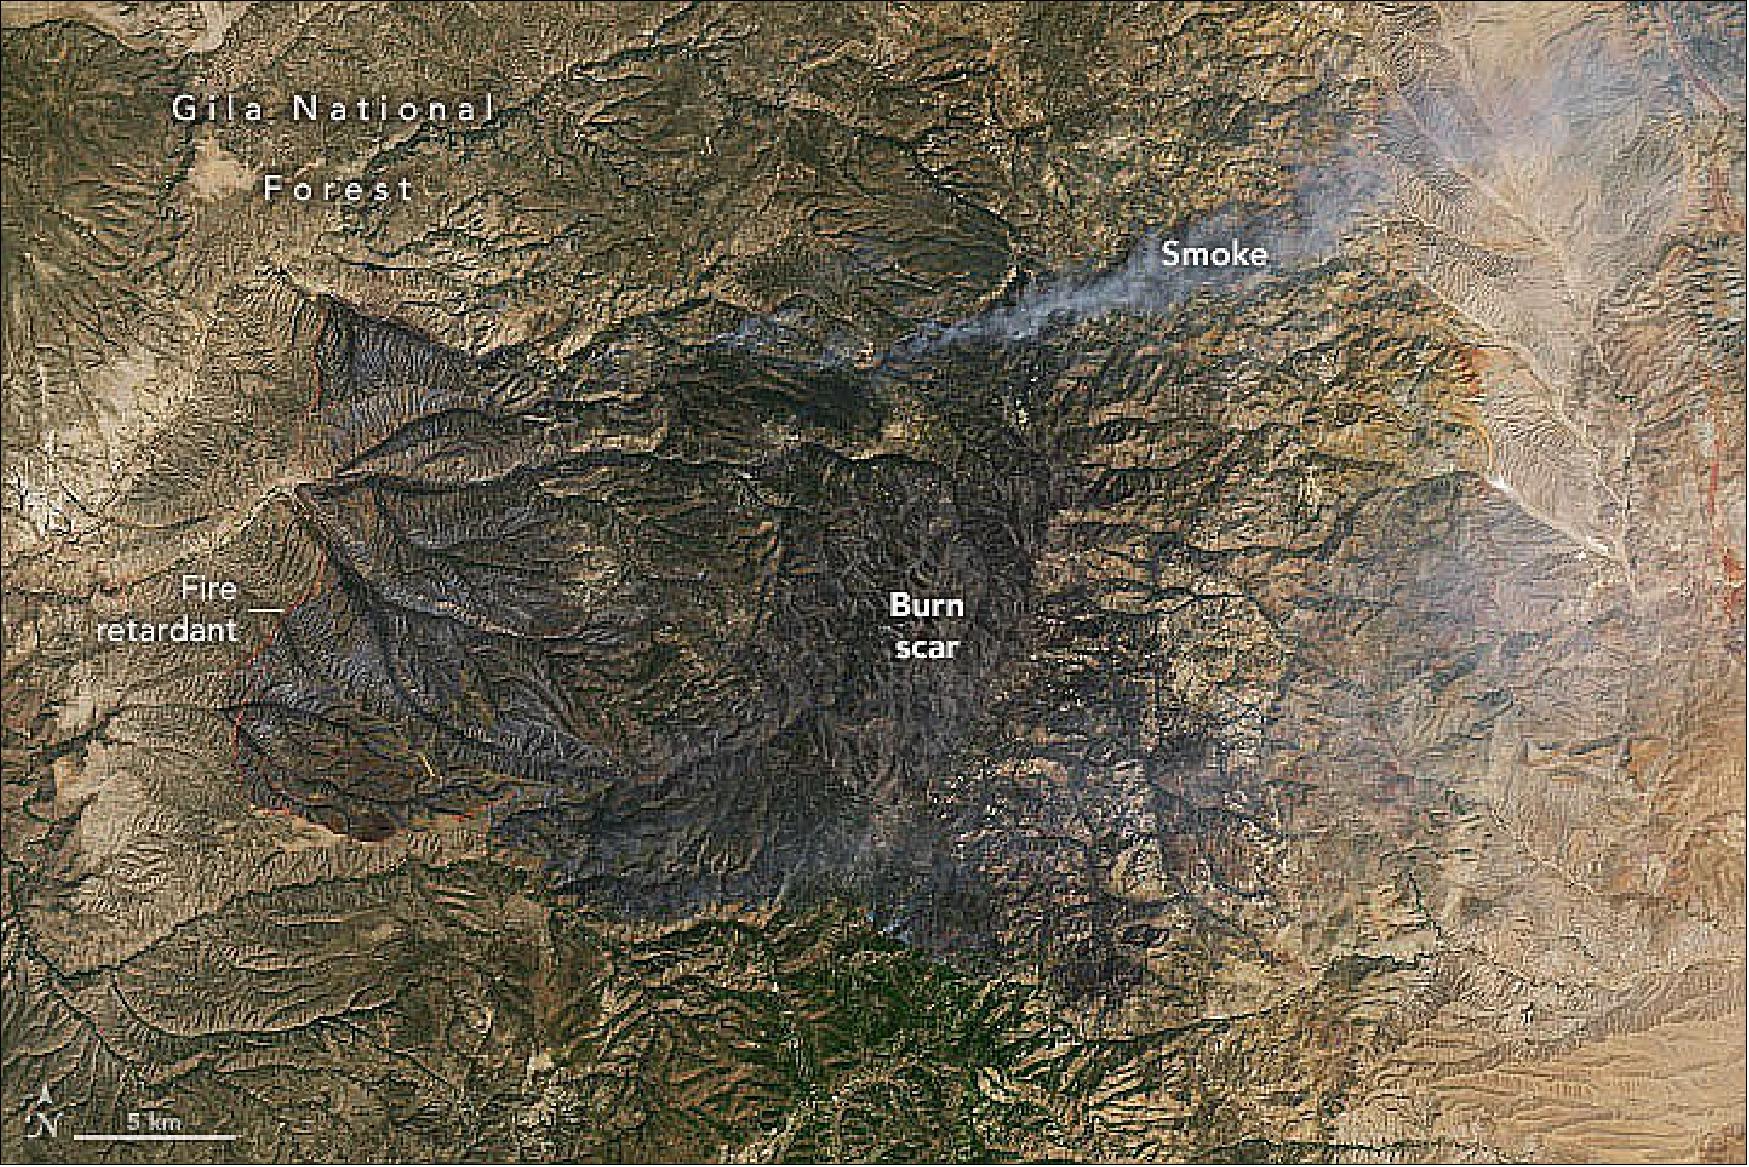 Figure 42: These images, acquired on May 21, 2022, by the OLI instrument on Landsat-8, show the area burned by the Black fire in both natural and false color (Figure 43). The false-color image combines shortwave infrared, near infrared, and visible light (OLI bands 7-5-2). Near and shortwave infrared help penetrate clouds and smoke (gray-white) to reveal the hotspots associated with active fires (red). With this combination, burned areas appear reddish-brown (image credit: NASA Earth Observatory images by Lauren Dauphin, using Landsat data from the U.S. Geological Survey. Story by Sara E. Pratt)